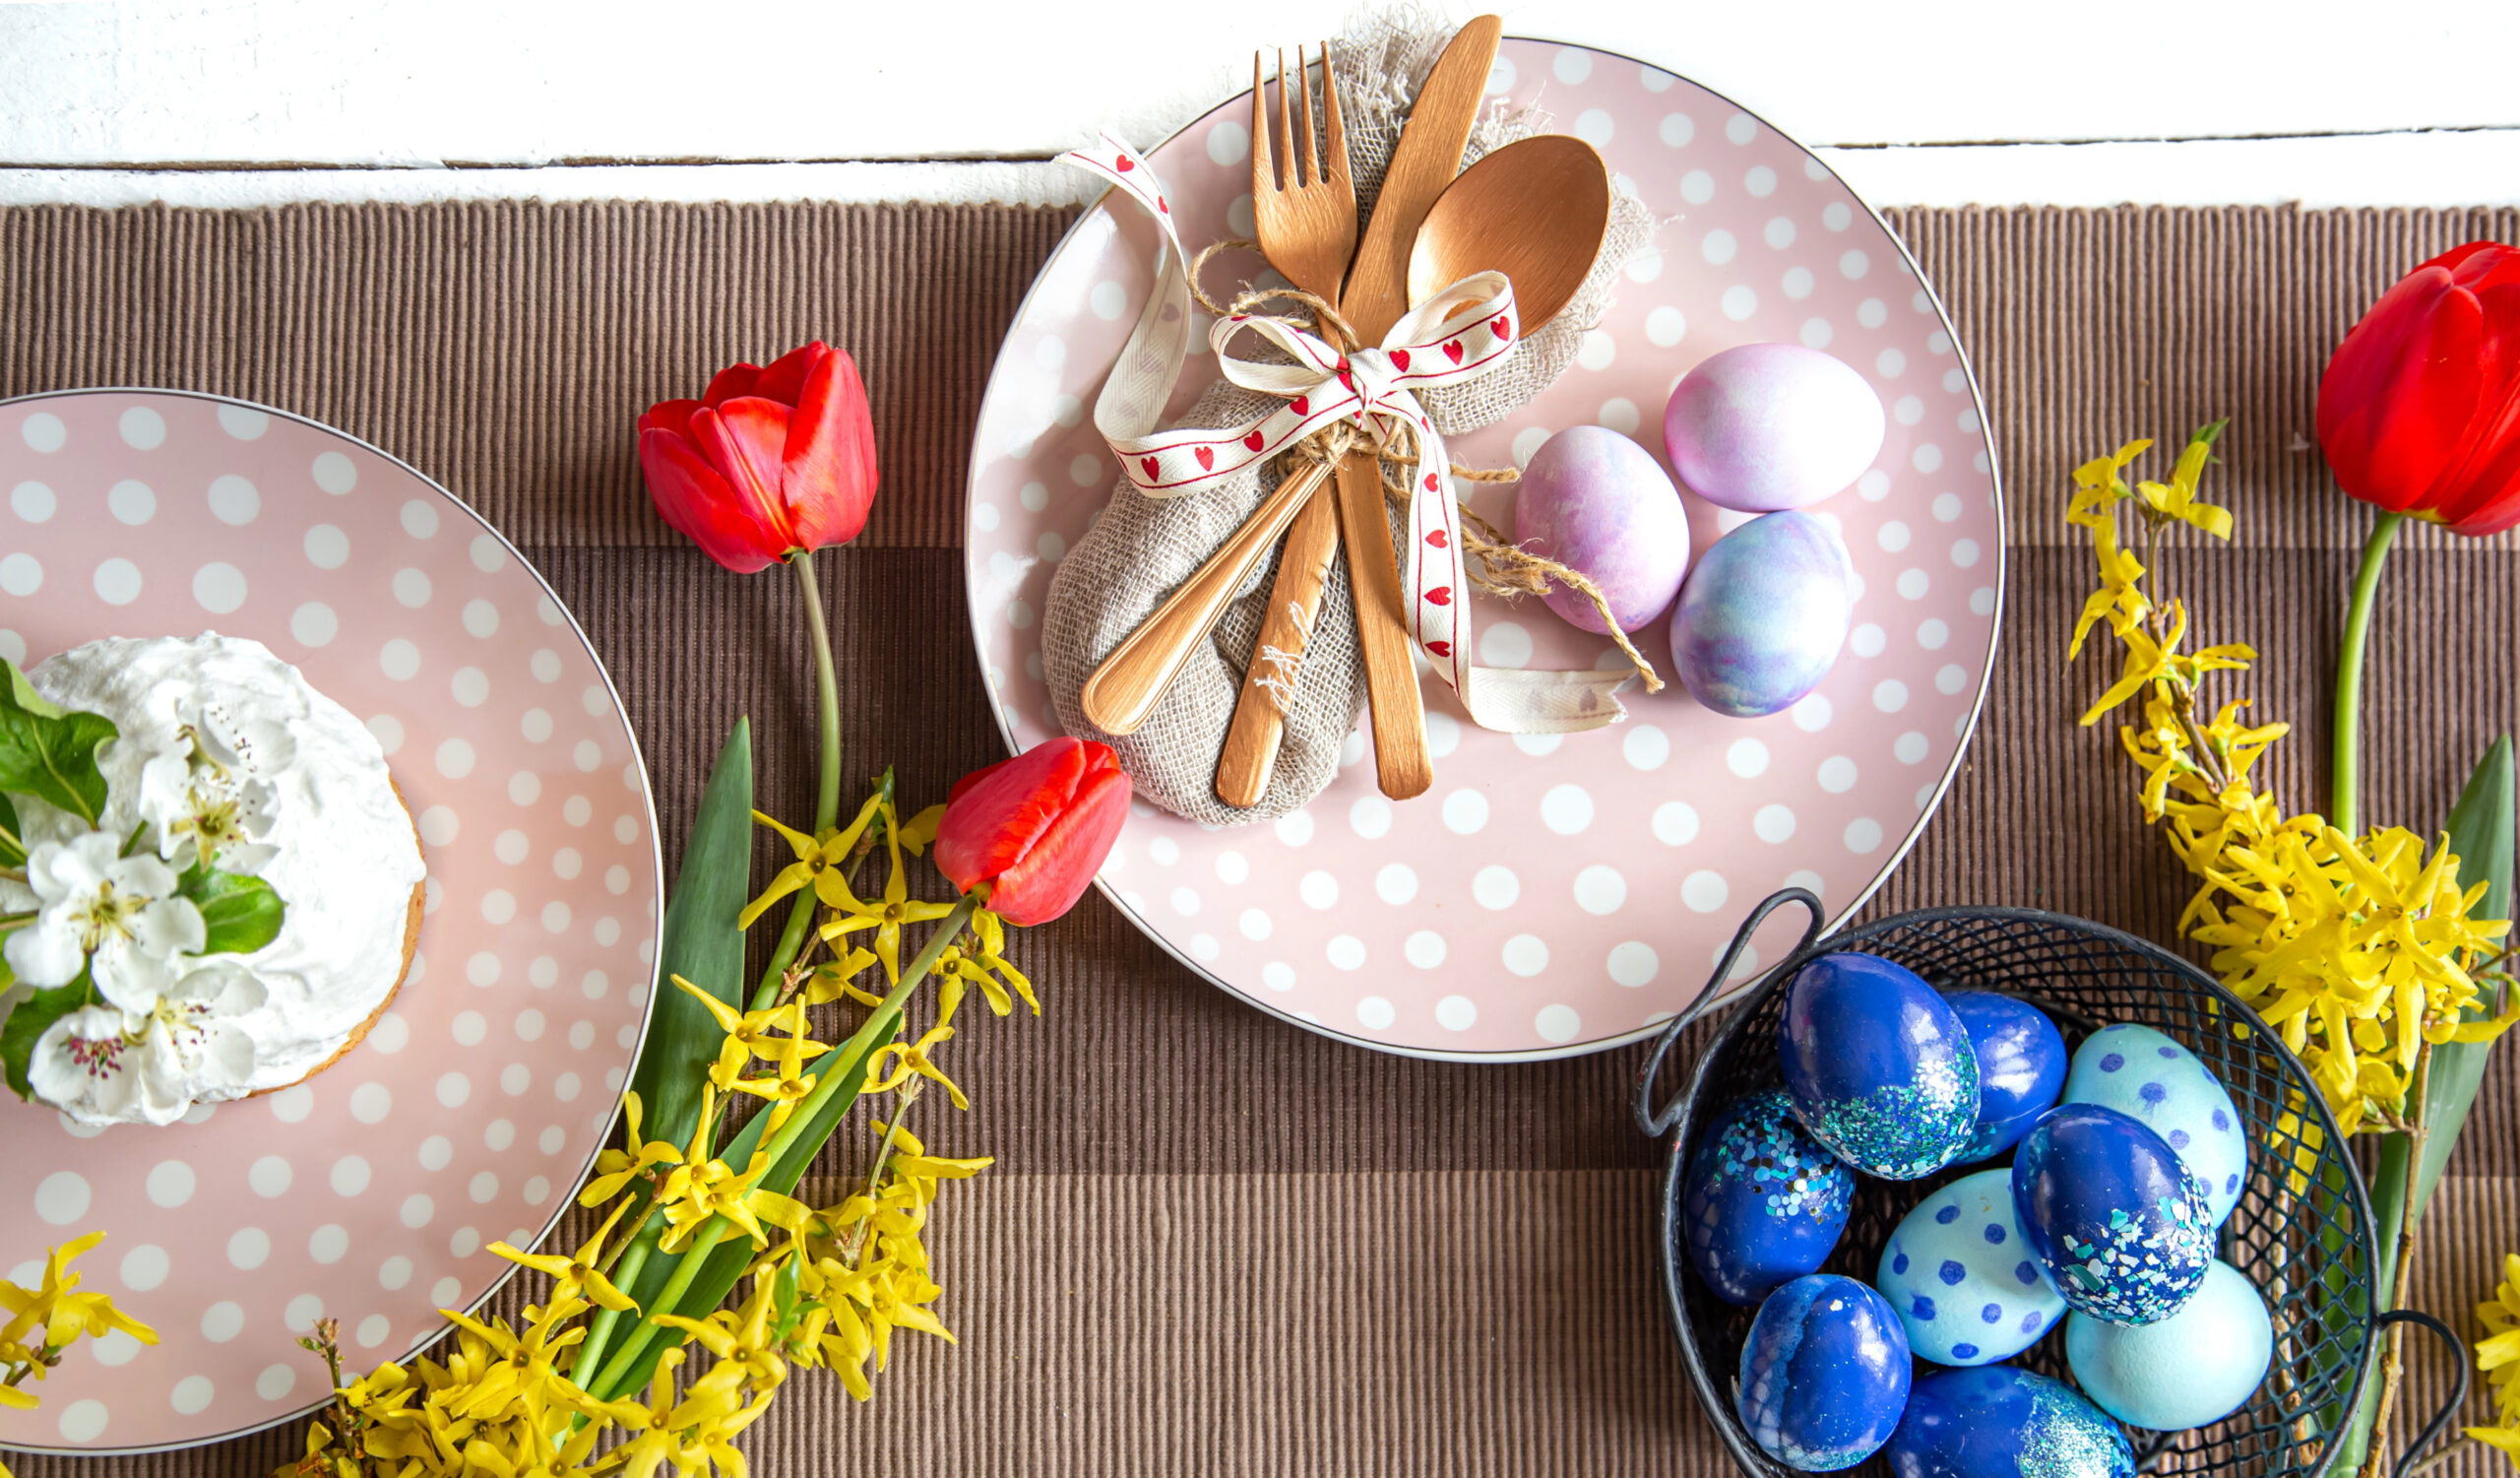 Easter meal place setting